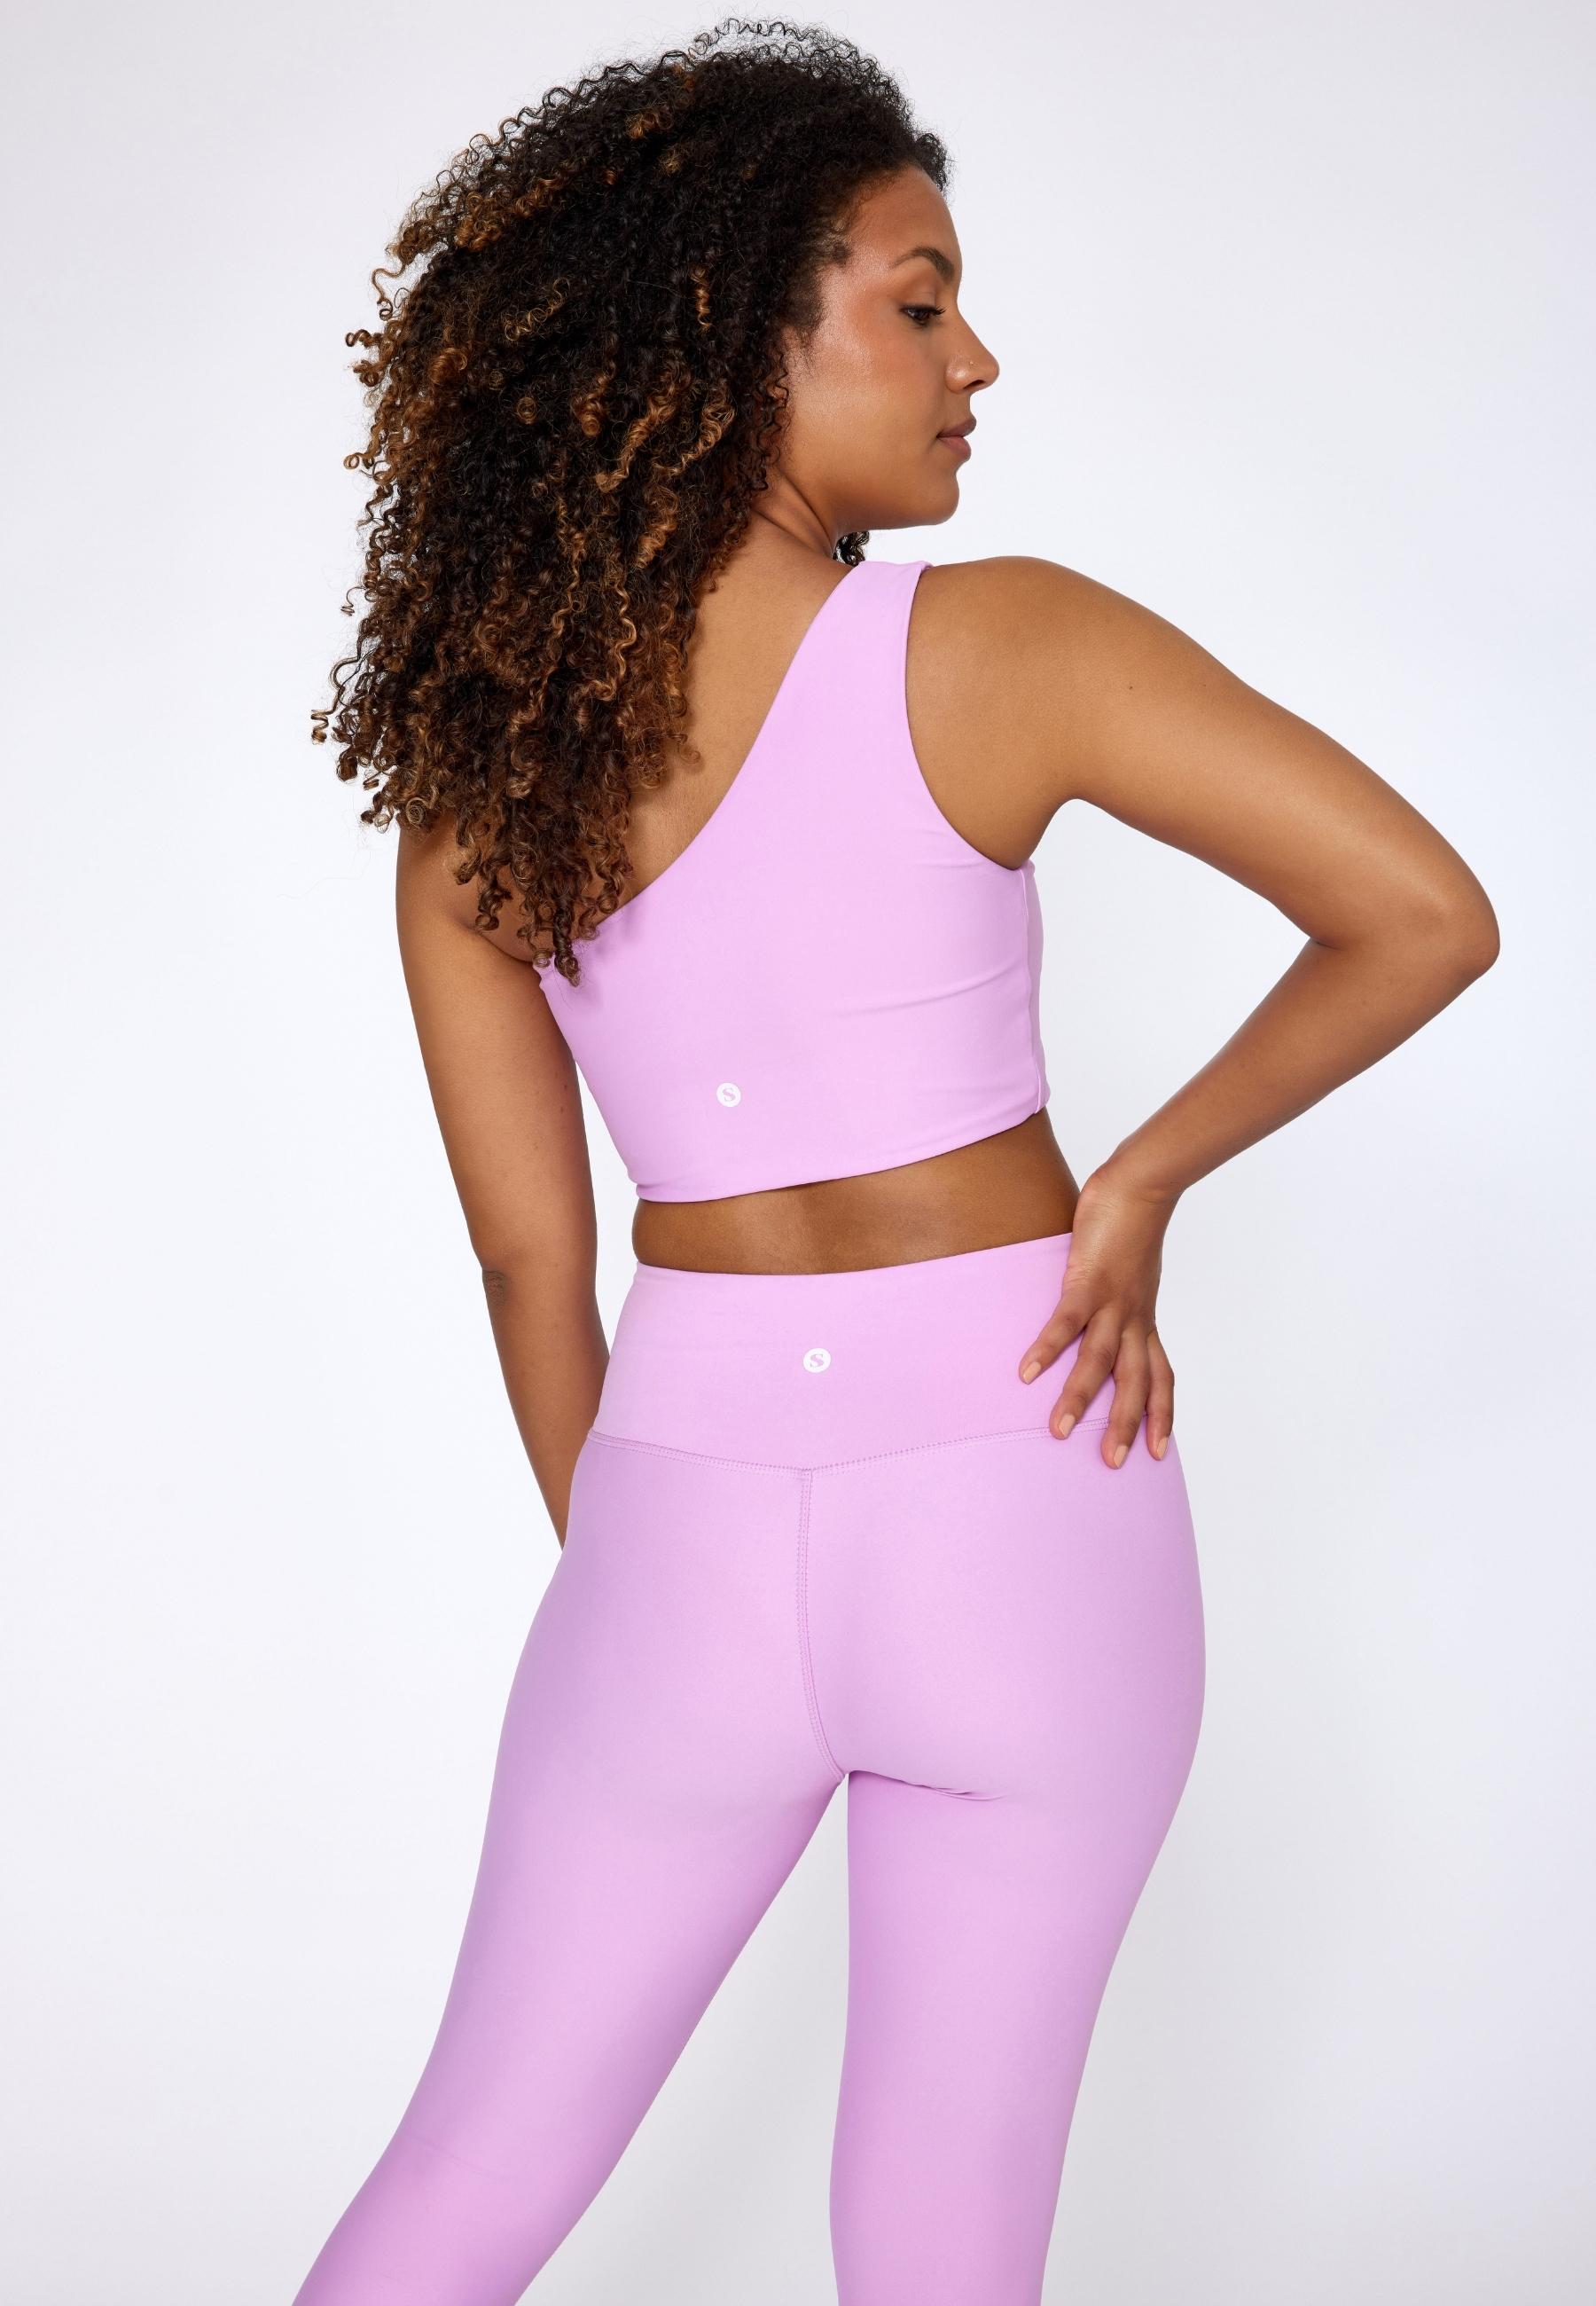 Sisterly Tribe - One Shoulder Top Orchid. One Shoulder design, Light to medium support, Buttery Soft & light, matte fabric.